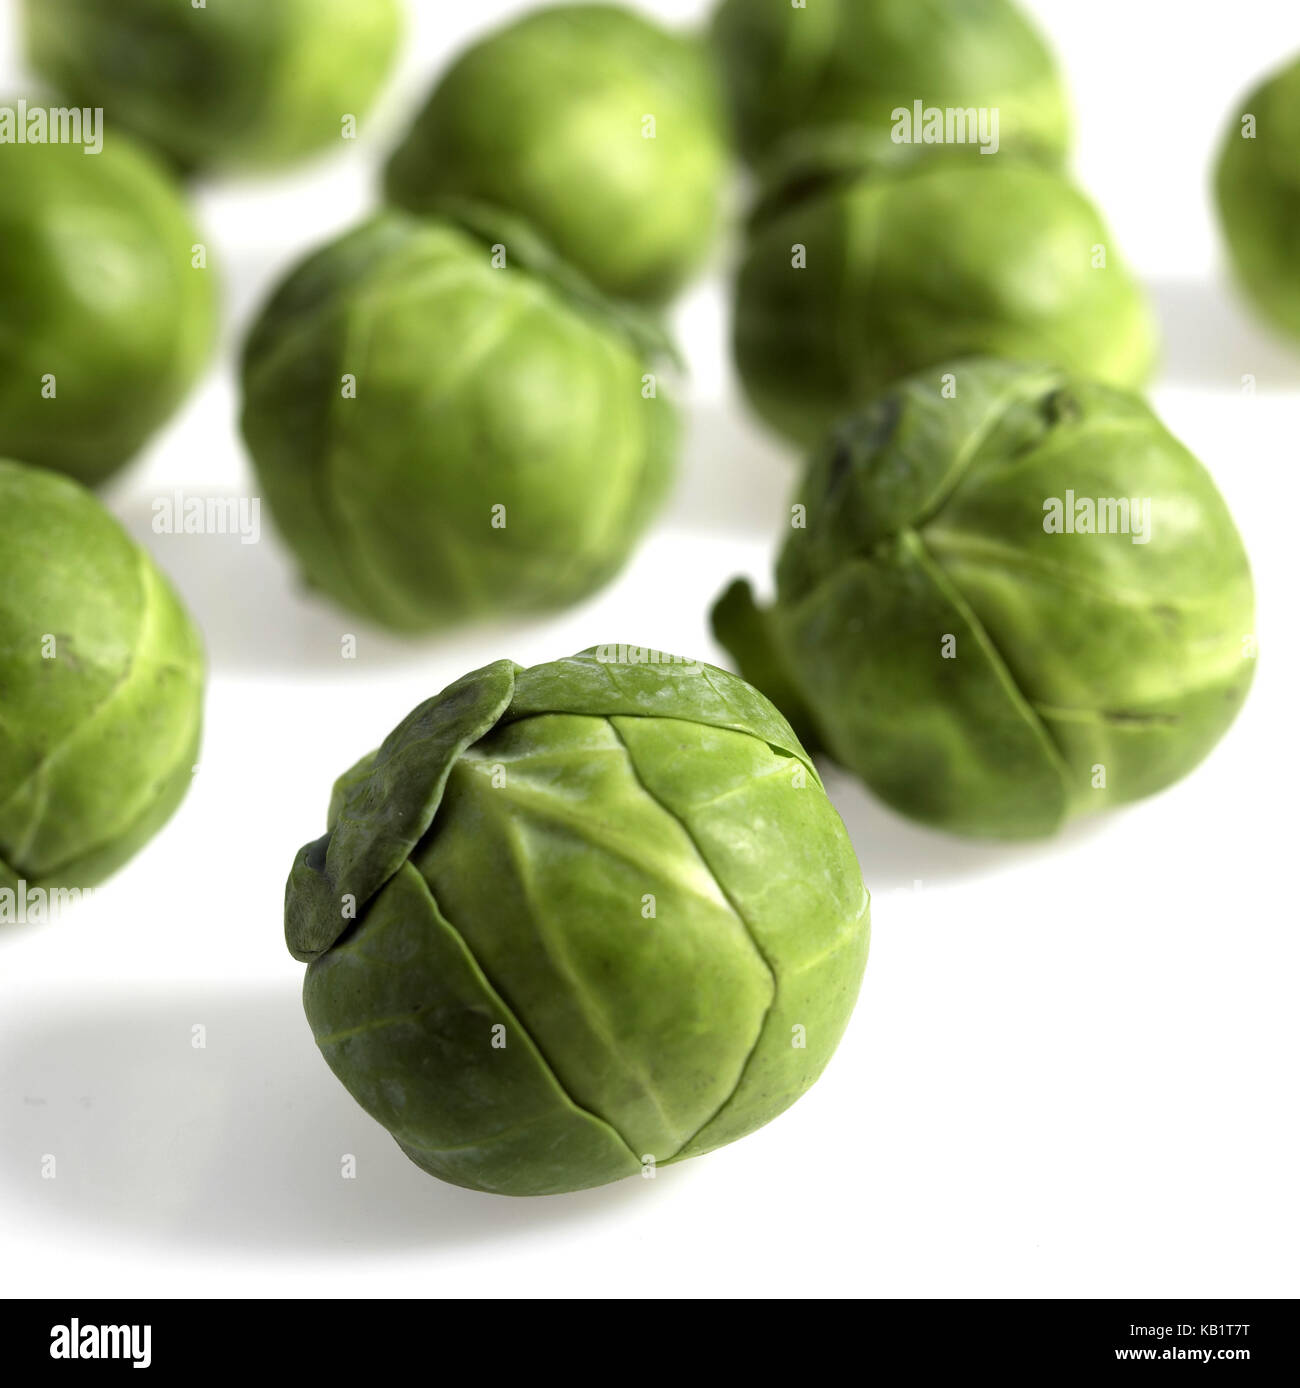 Brussels sprouts, Brassica oleracea, white background, Stock Photo